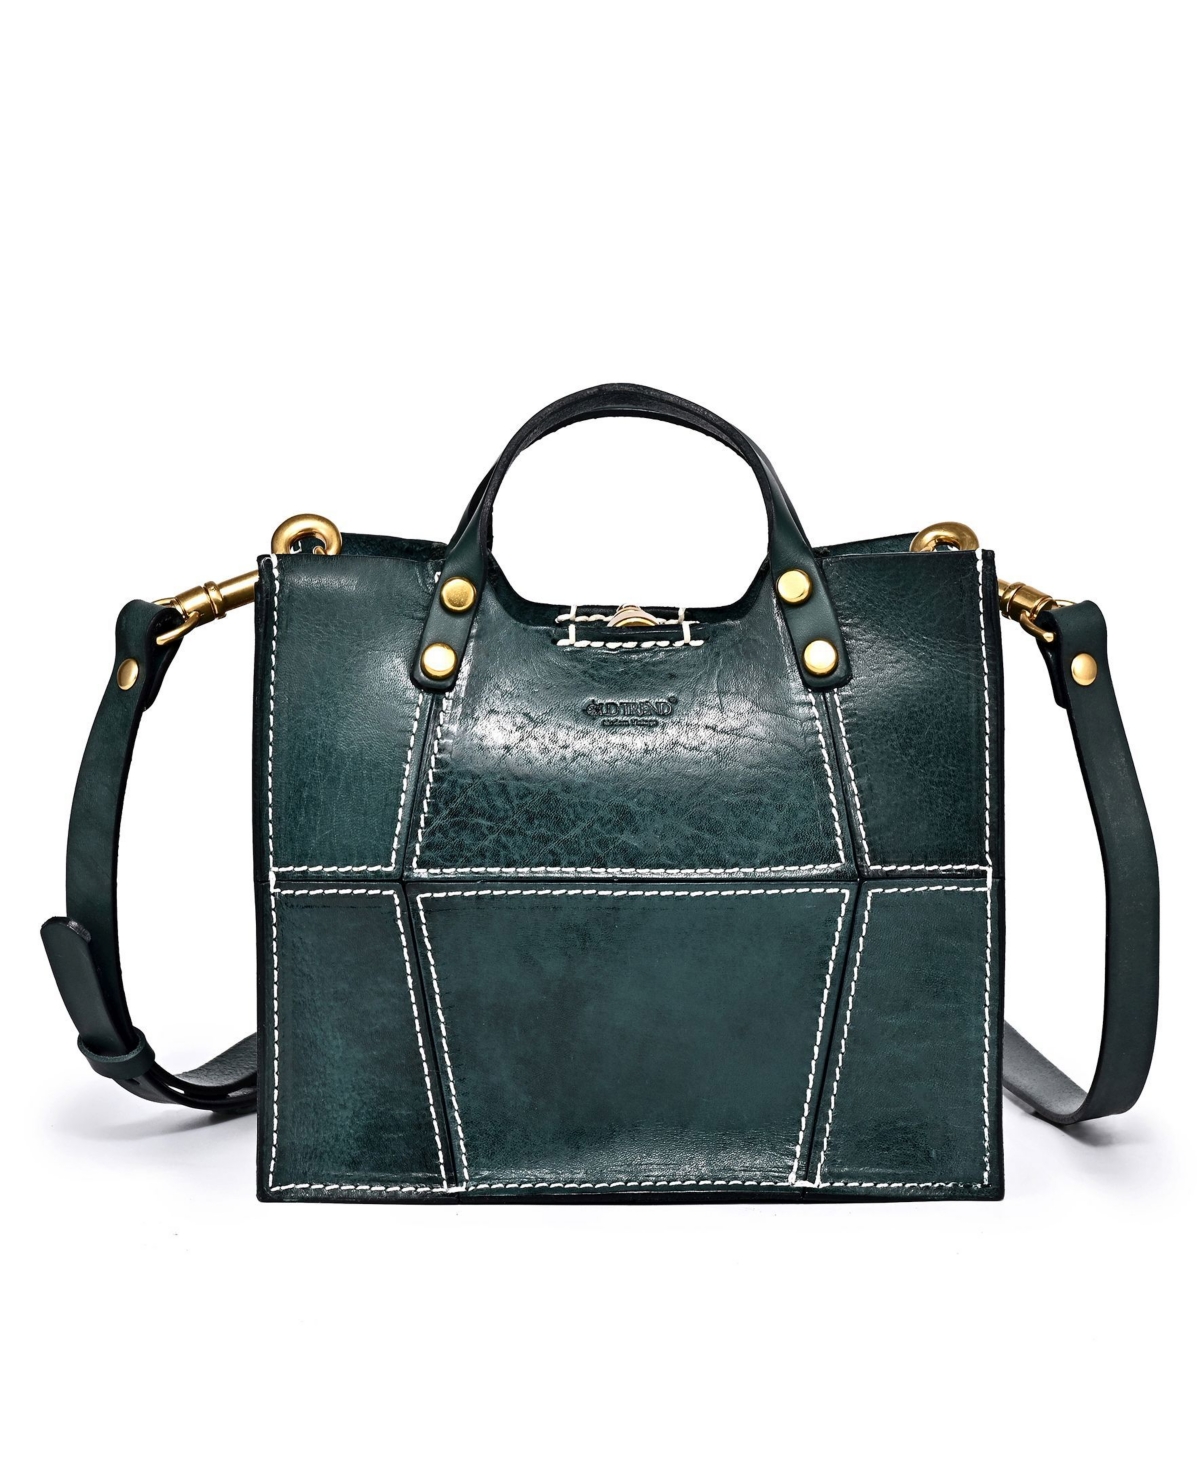 Women's Genuine Leather Rosa Transport Tote Bag - Teal